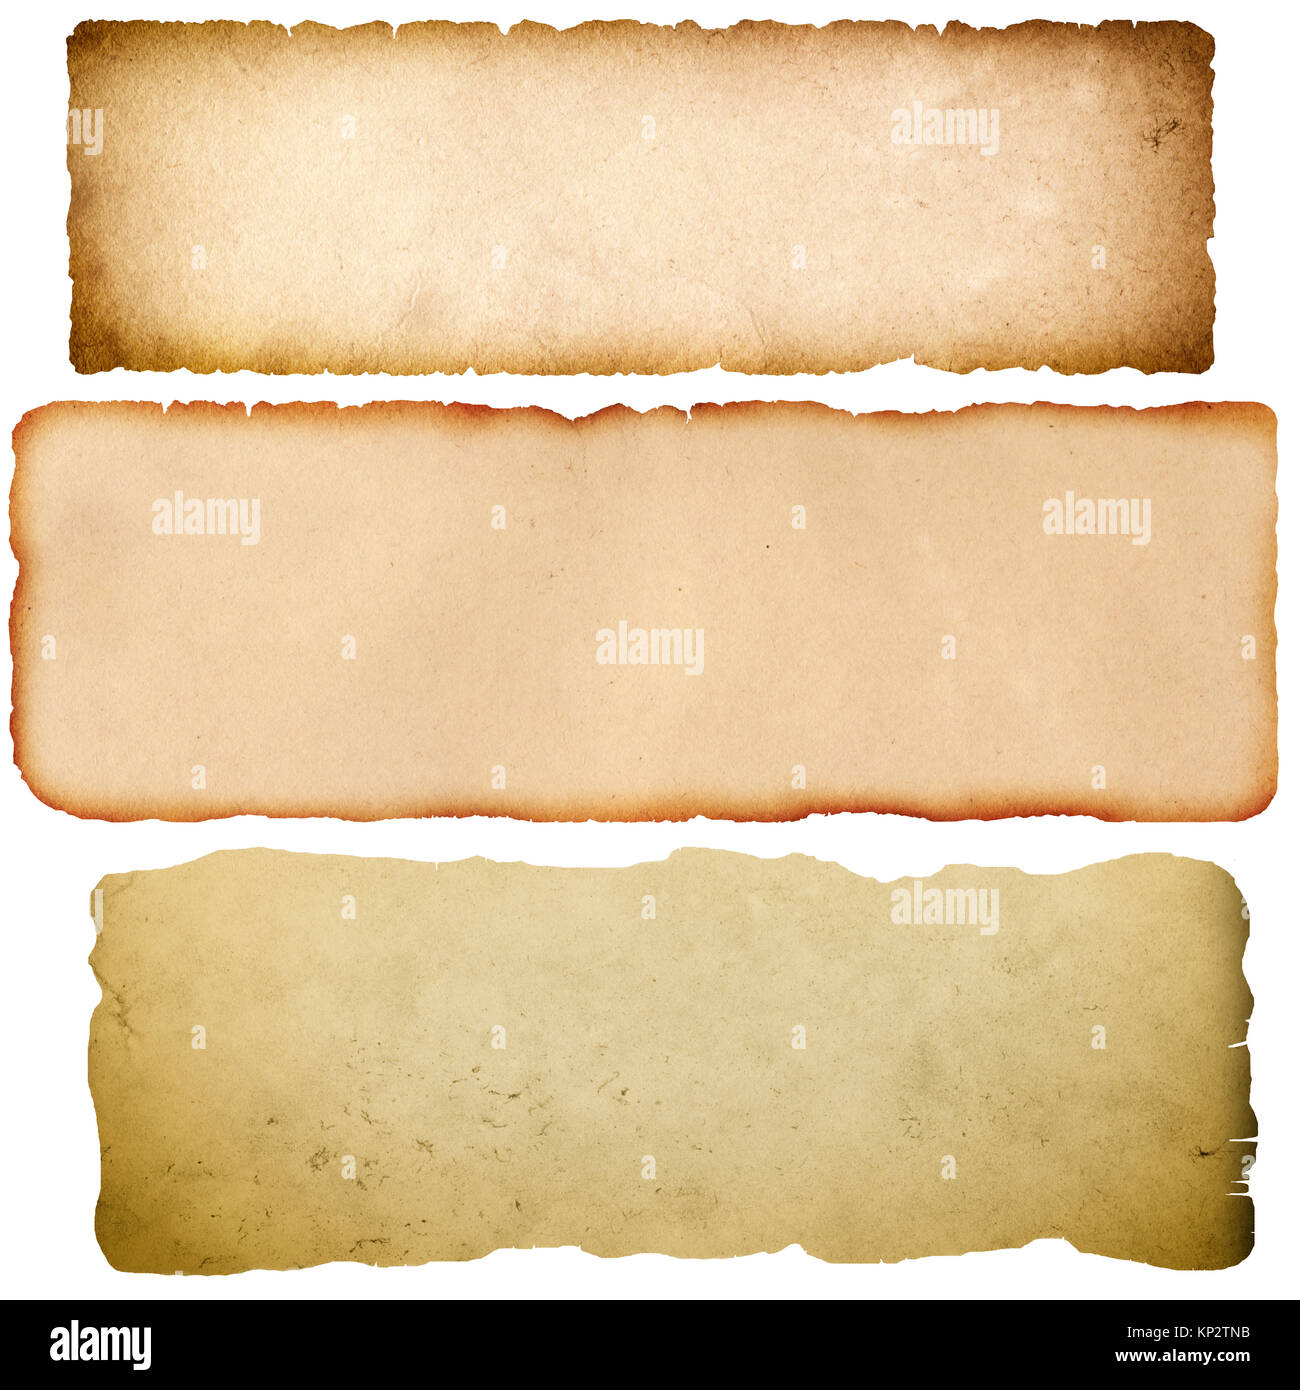 Old parchment set. Natural grunge paper texture. Stock Photo